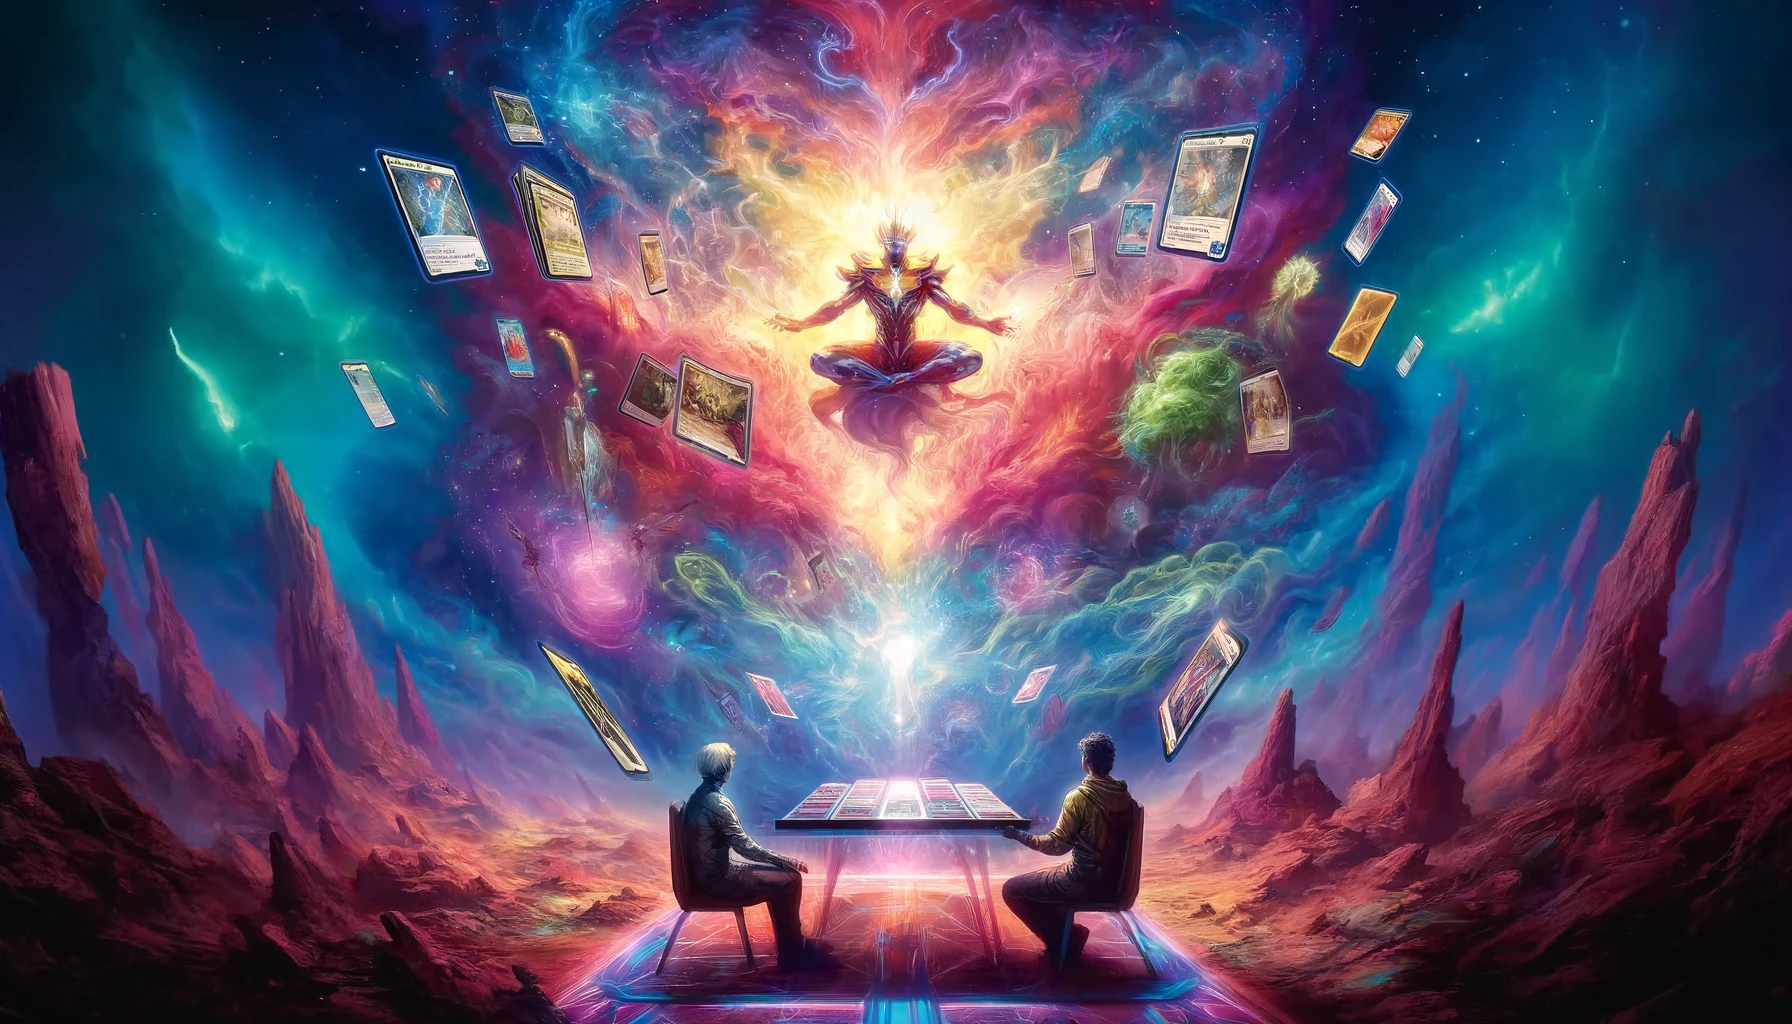 In an ethereal realm, two Marvel Snap players are depicted at the climax of their game, with cards levitating and radiating mystical energy against a surreal celestial-terrestrial backdrop, capturing the game's dramatic and otherworldly essence.